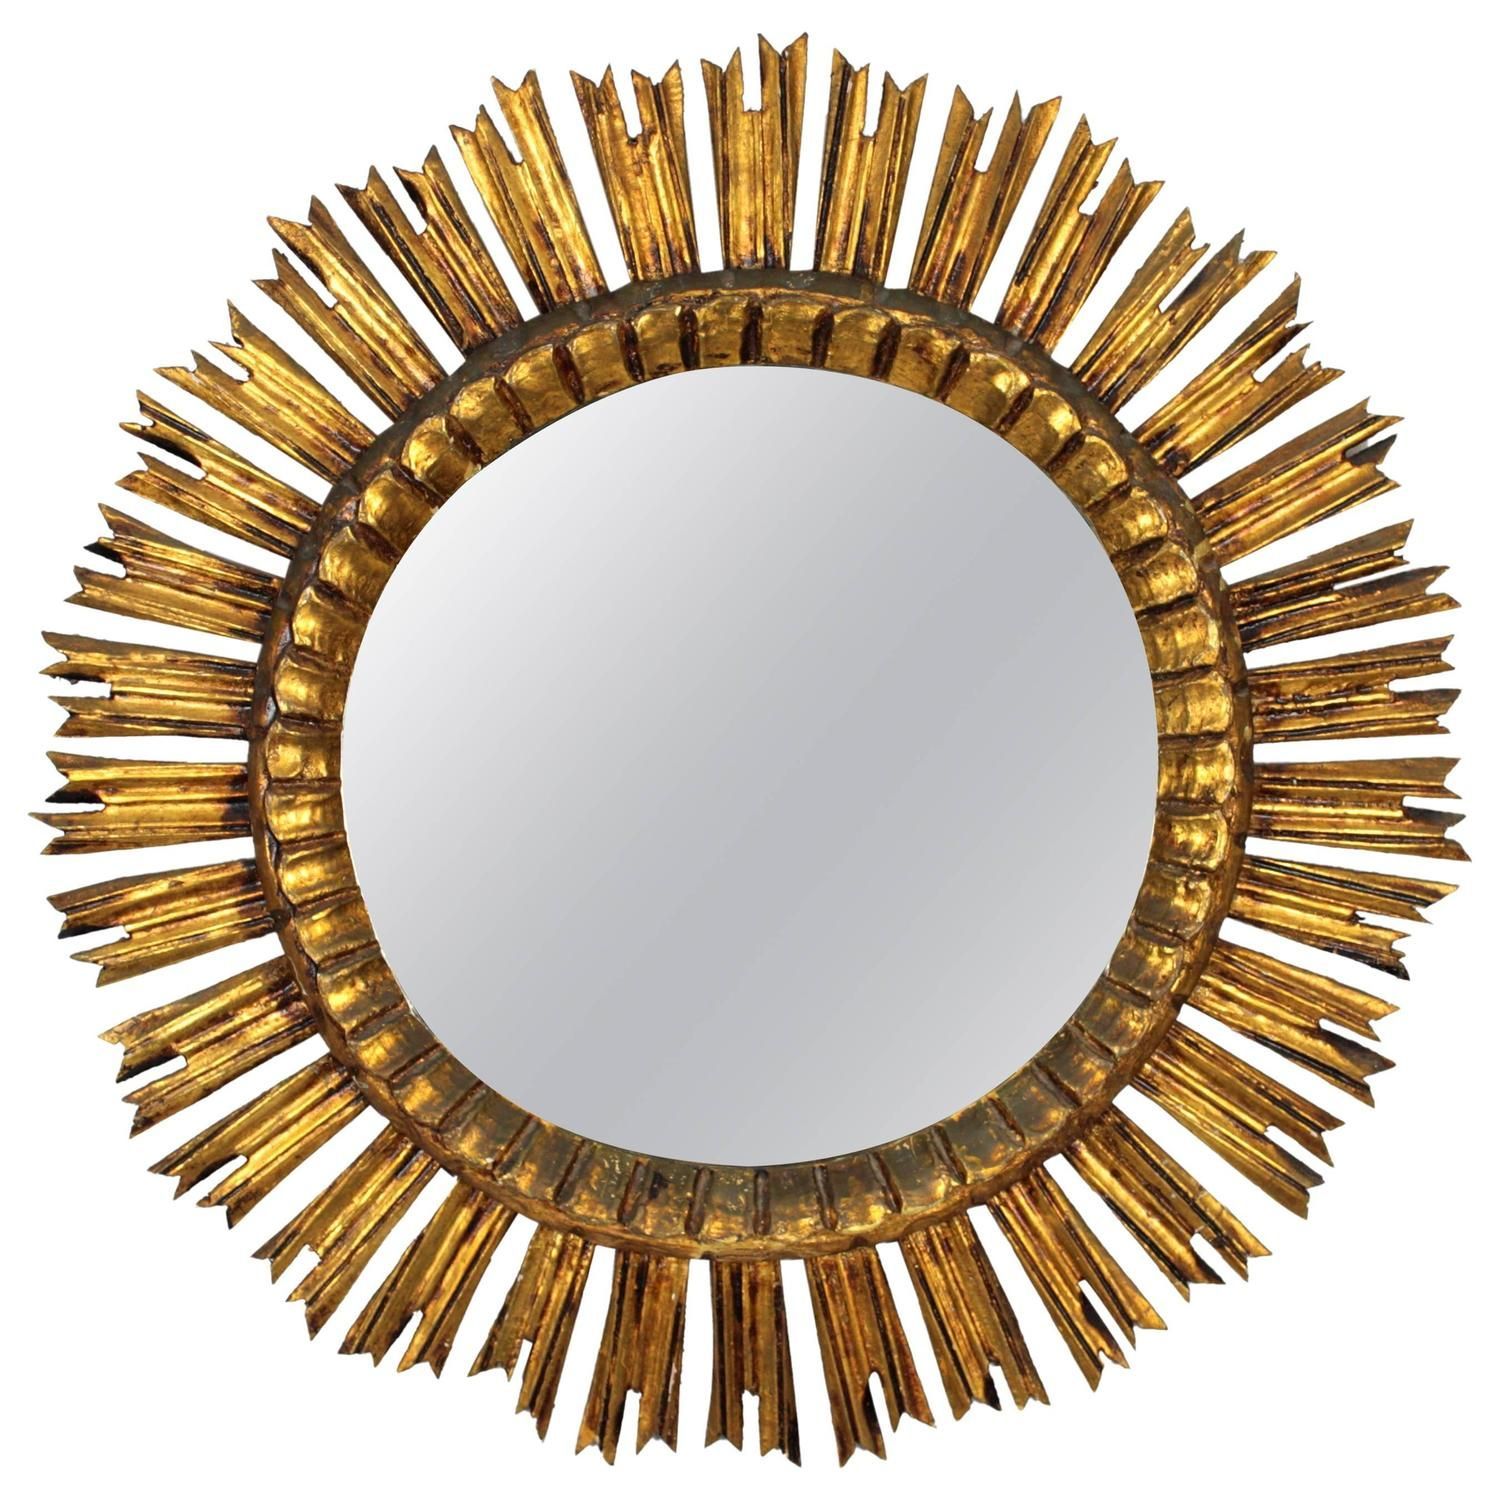 French Carved Giltwood Sunburst Mirror, 1930s | 1stdibs | Sunburst For Brylee Traditional Sunburst Mirrors (View 2 of 15)